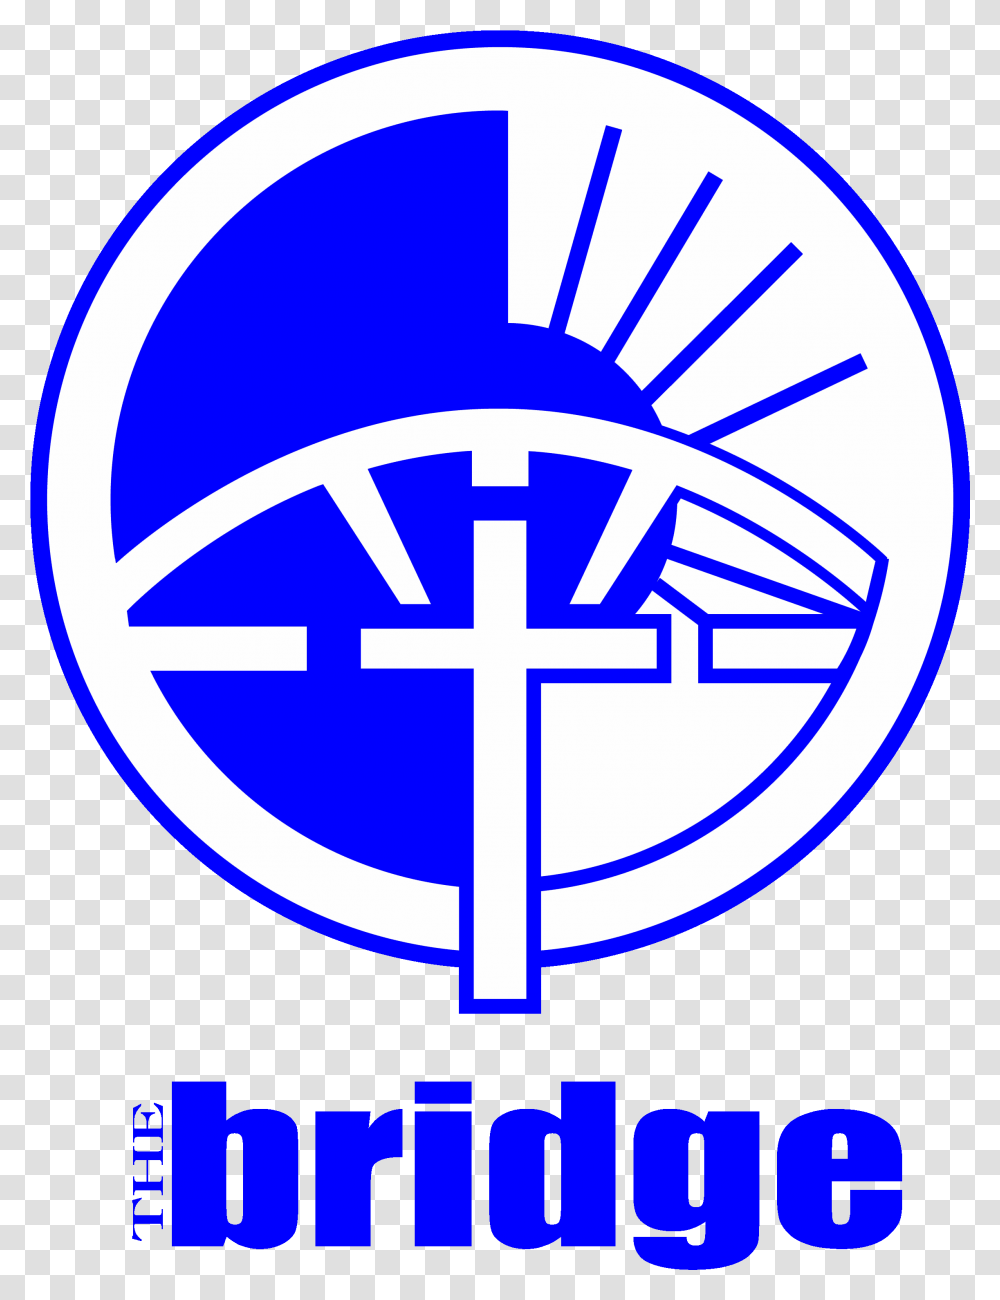 Home The Bridge Over Troubled Waters Bridge Over Troubled Waters Pasadena, Symbol, Logo, Trademark, Emblem Transparent Png